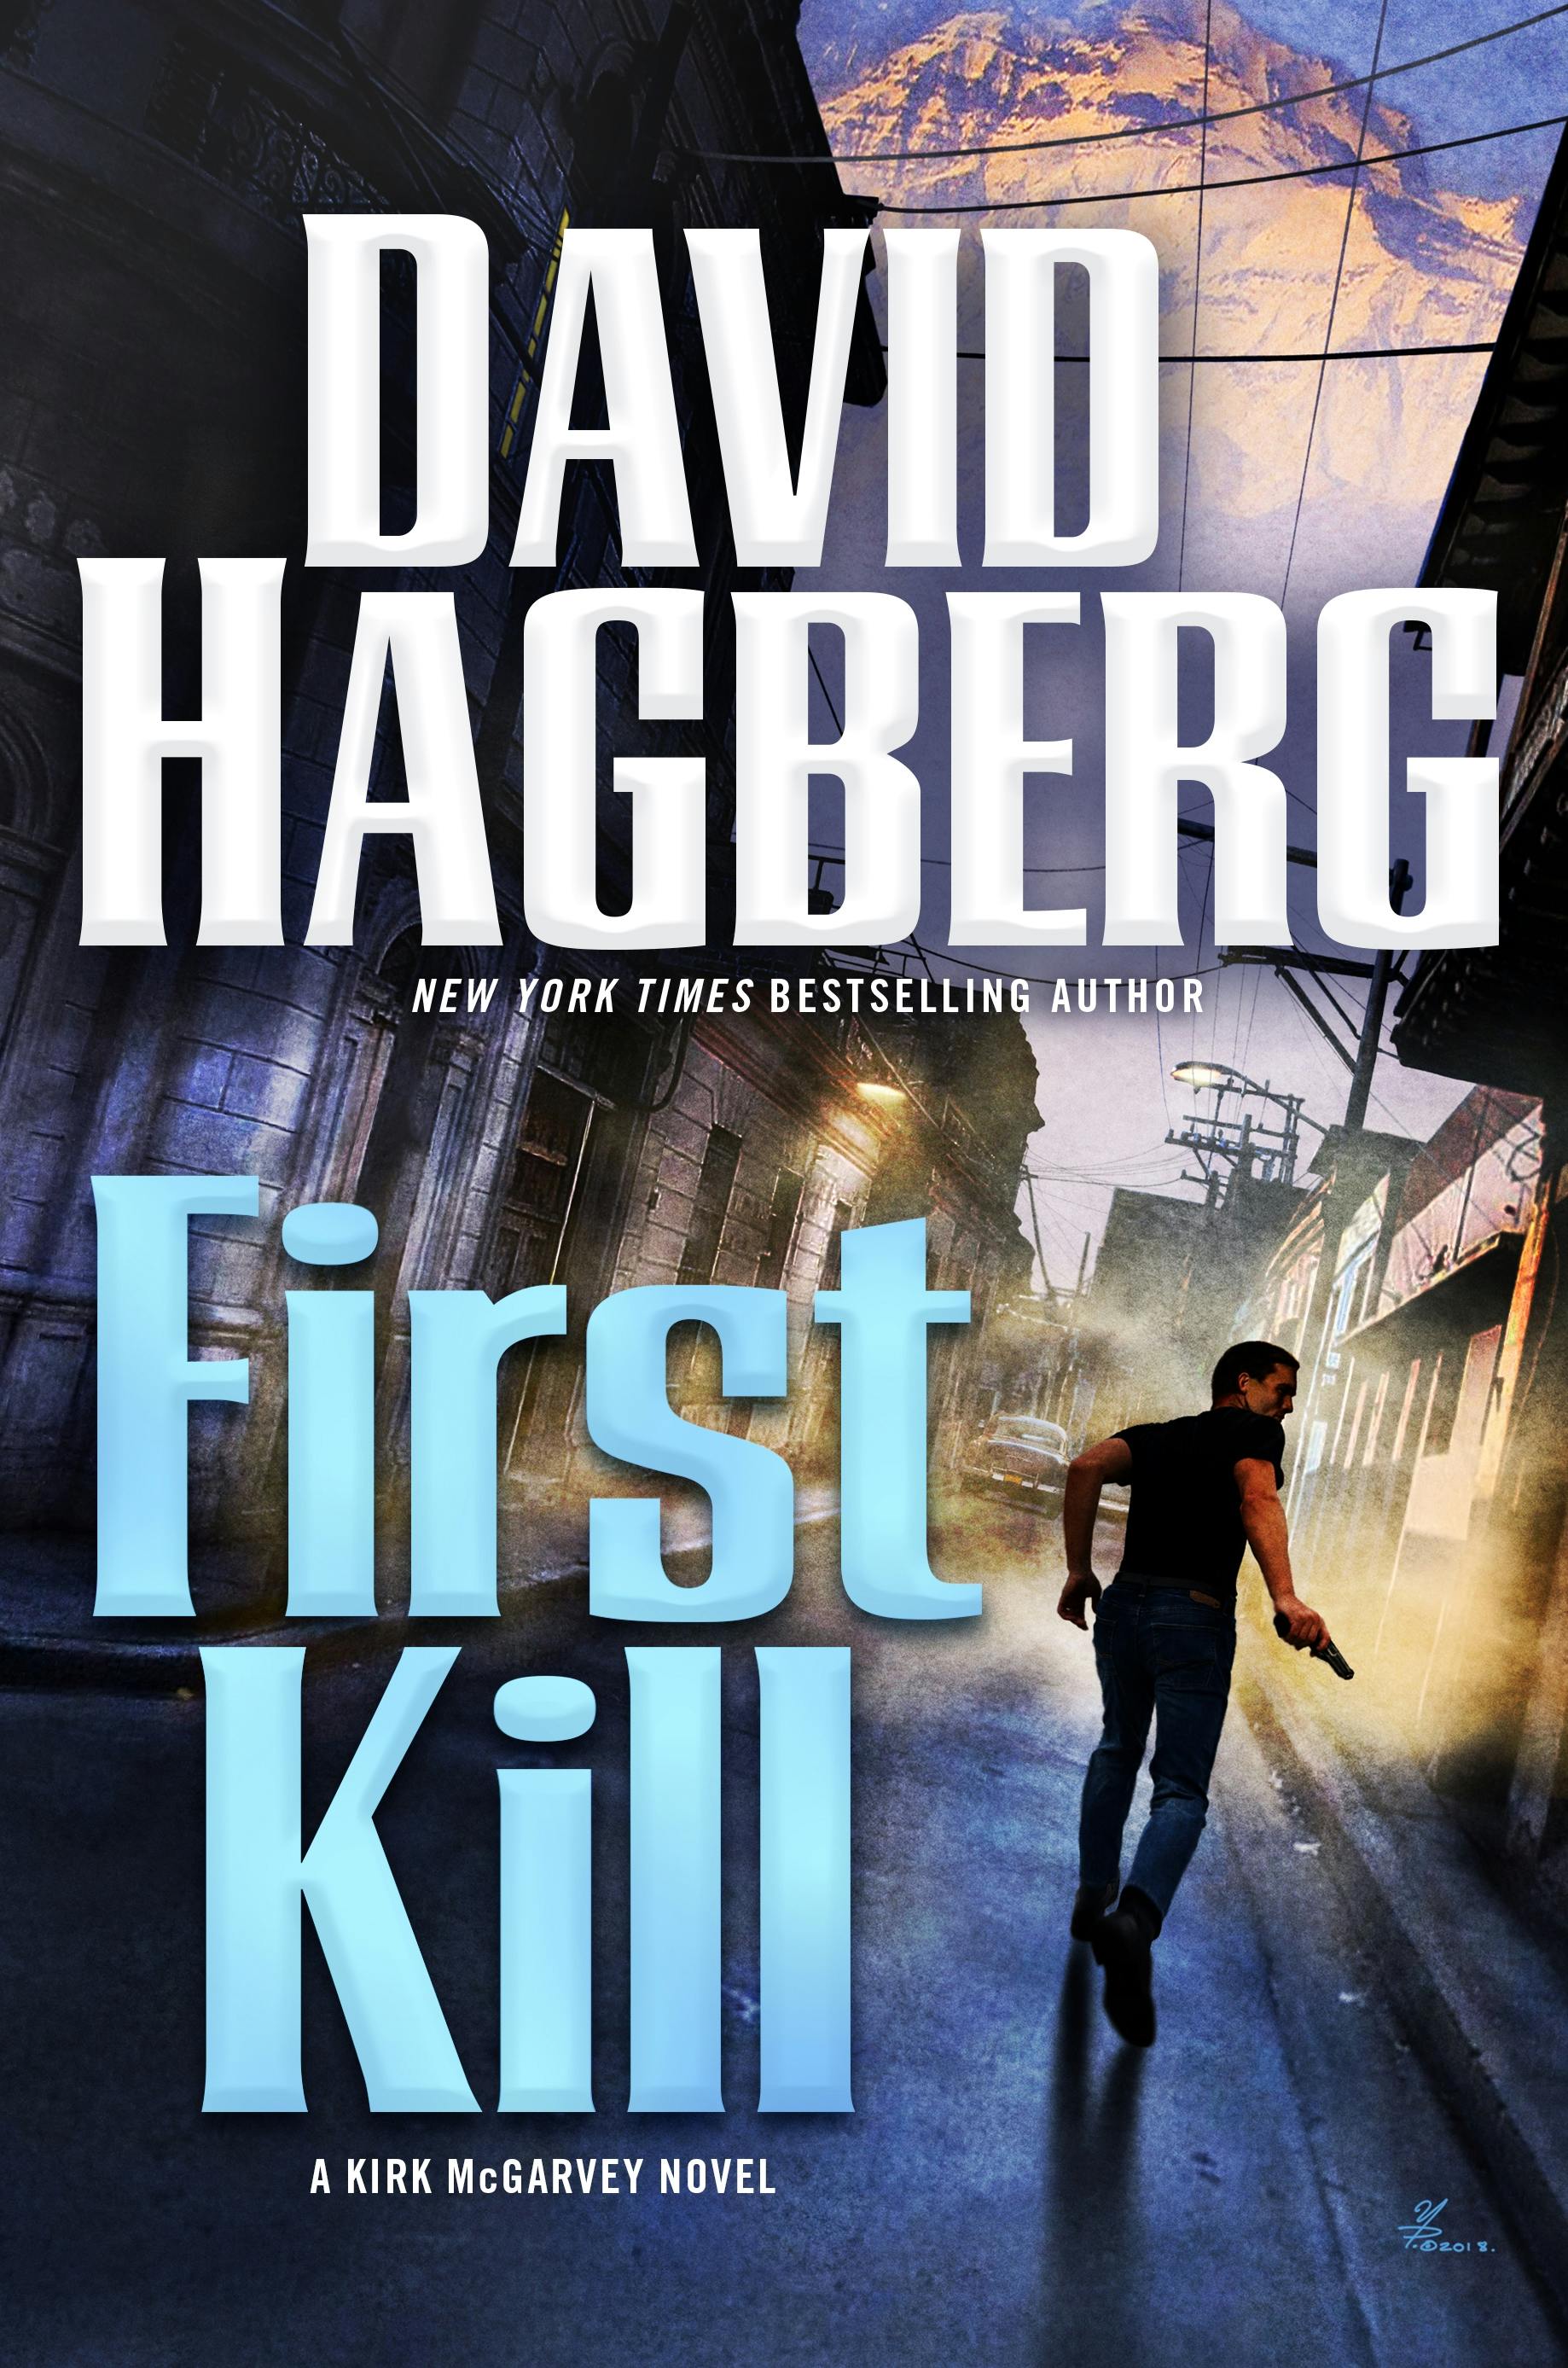 Cover for the book titled as: First Kill